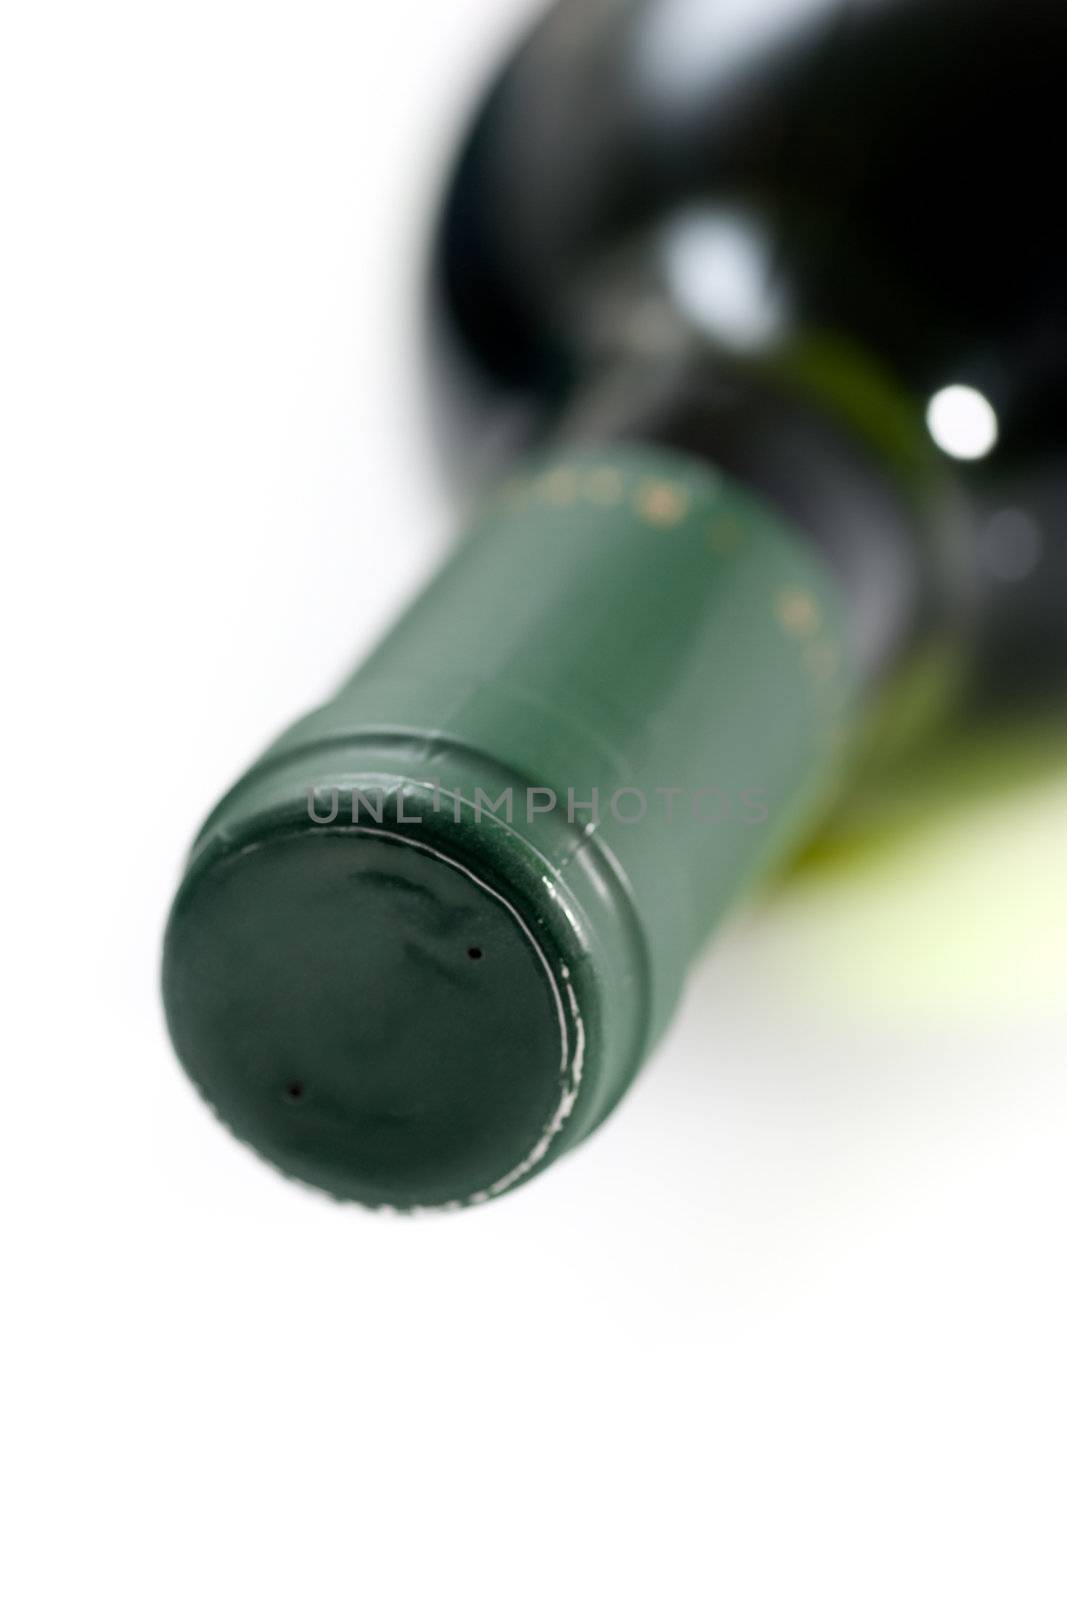 Closeup of the neck and spout of a wine bottle, lying on its side.